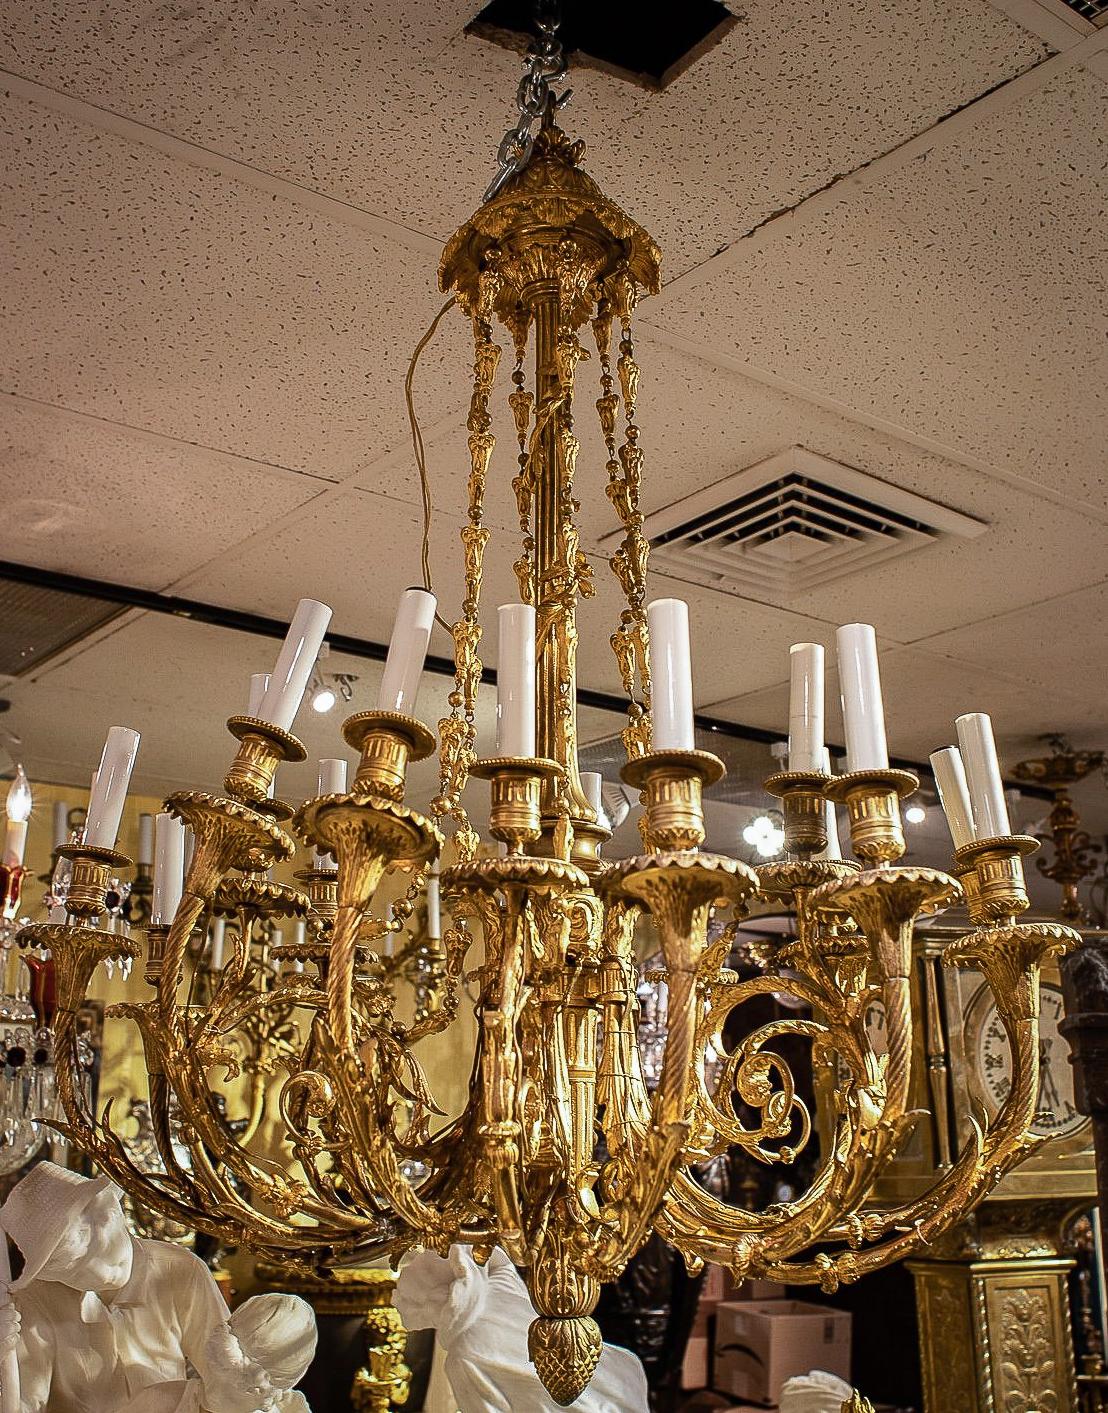 19th century French gilt bronze chandelier in the Louis XVI style with 18 electrified candles, ready for use.